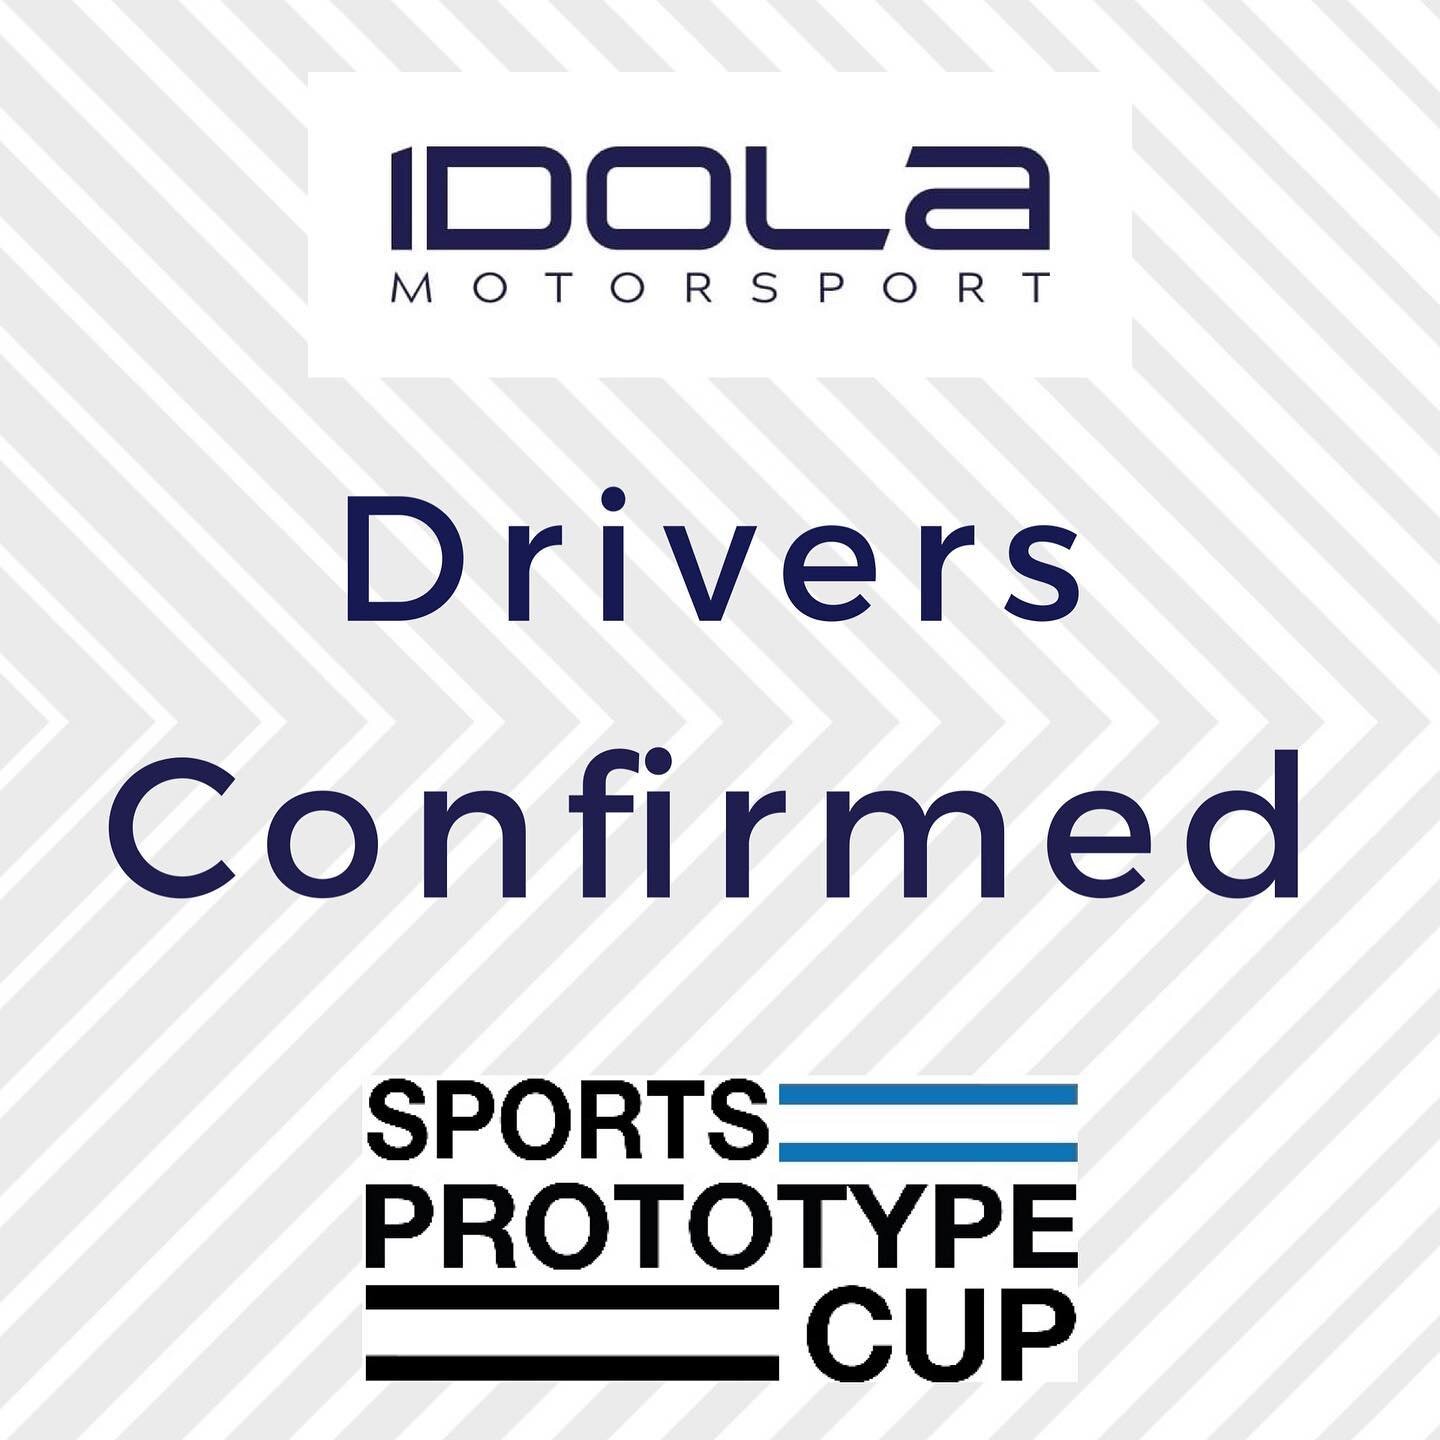 3 Cars / 3 Drivers - This weekend we&rsquo;re heading to @silverstonecircuit to compete in @sportsprototypecup in collaboration with @zeoprototypes 

With nearly 25 cars on the grid we&rsquo;re looking forward to racing

Drivers in the seats:
@rspeed